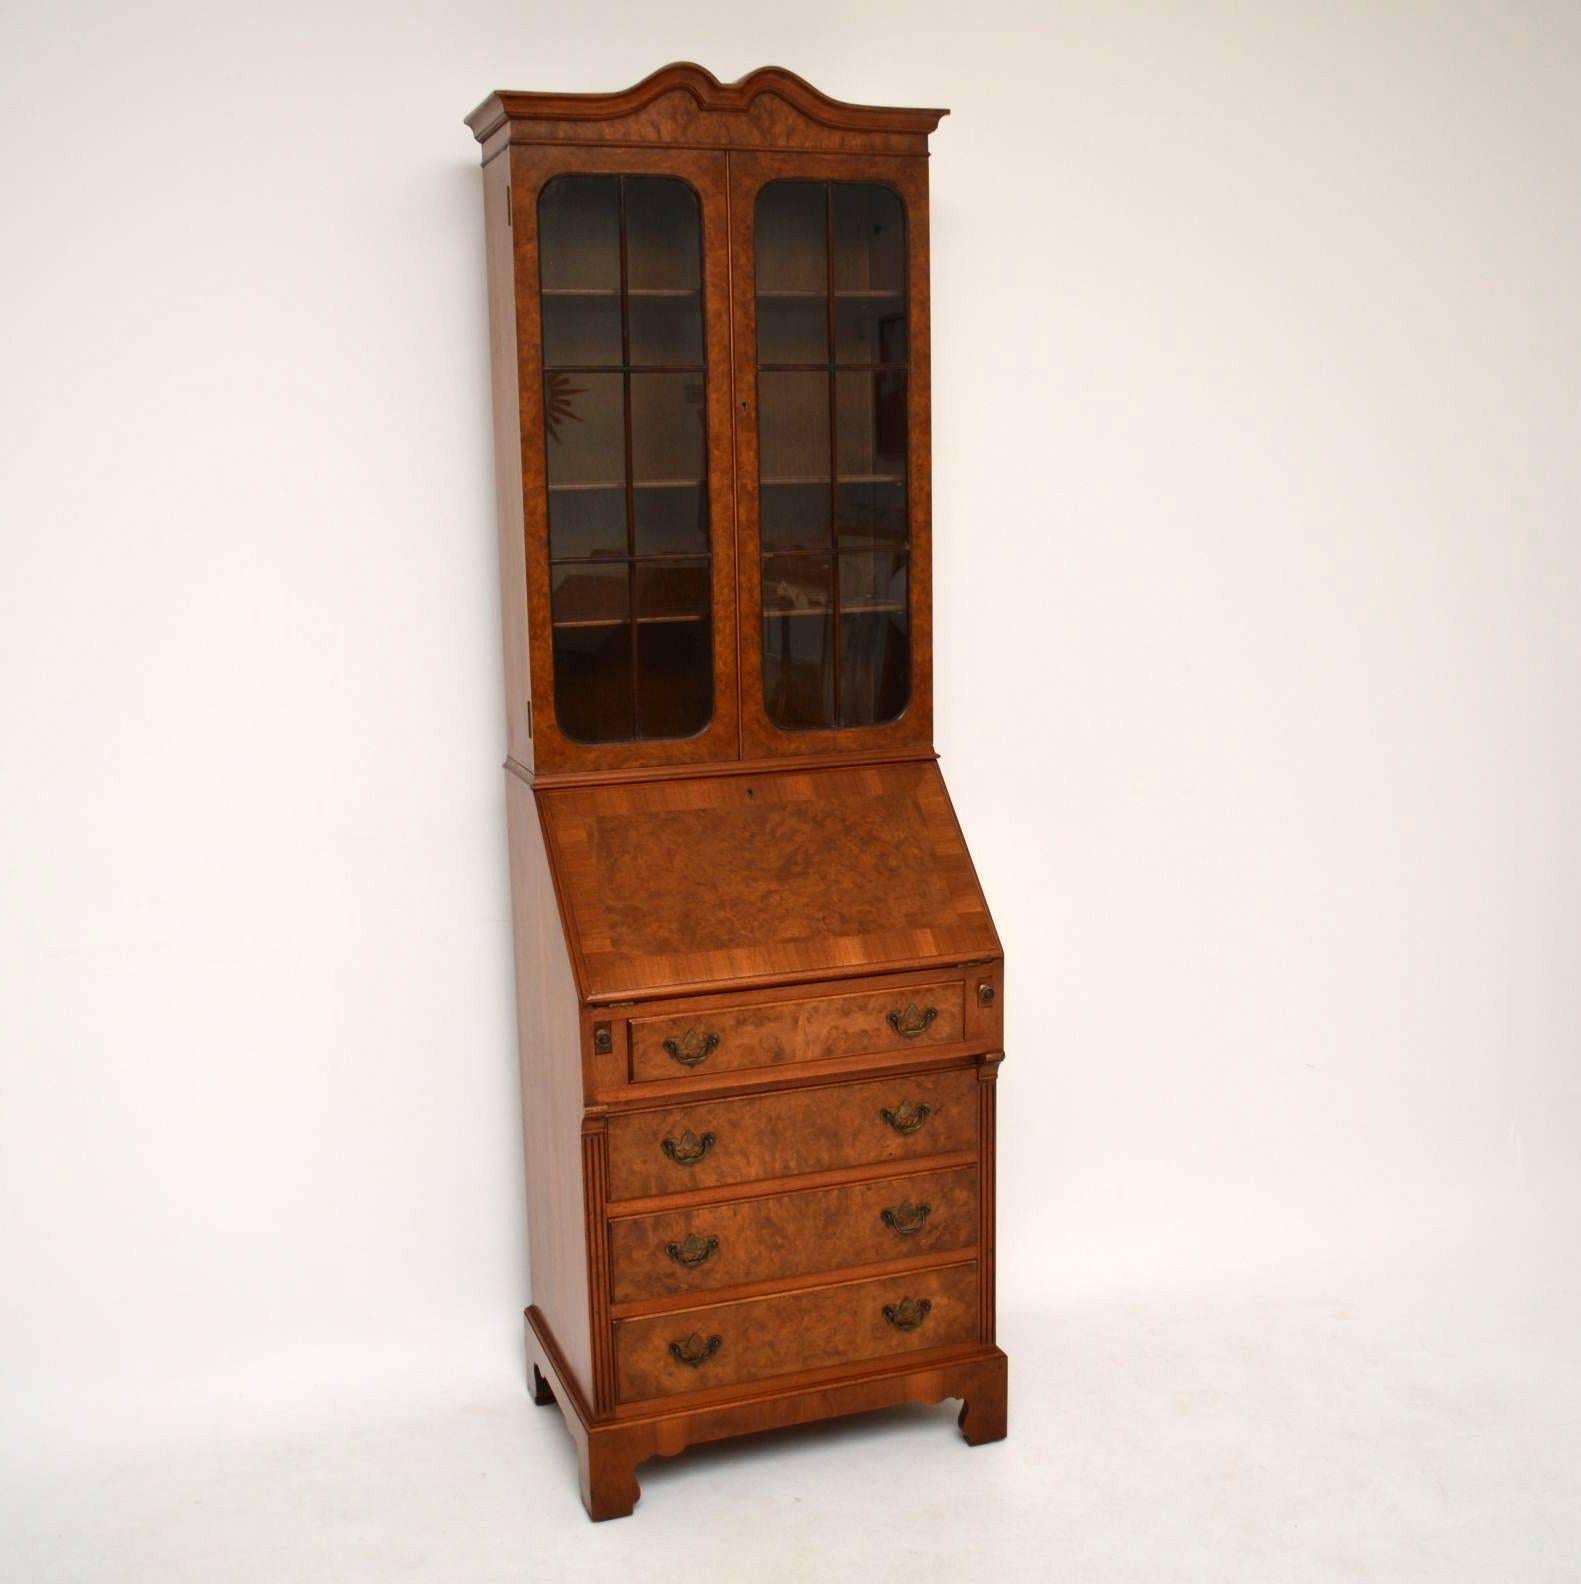 Antique walnut bureau bookcase of slim proportions, in good original condition and dating from around the 1920s period. The frontage is mainly burr walnut & the sides are figured walnut. The top section has a double arched cornice, with two astral